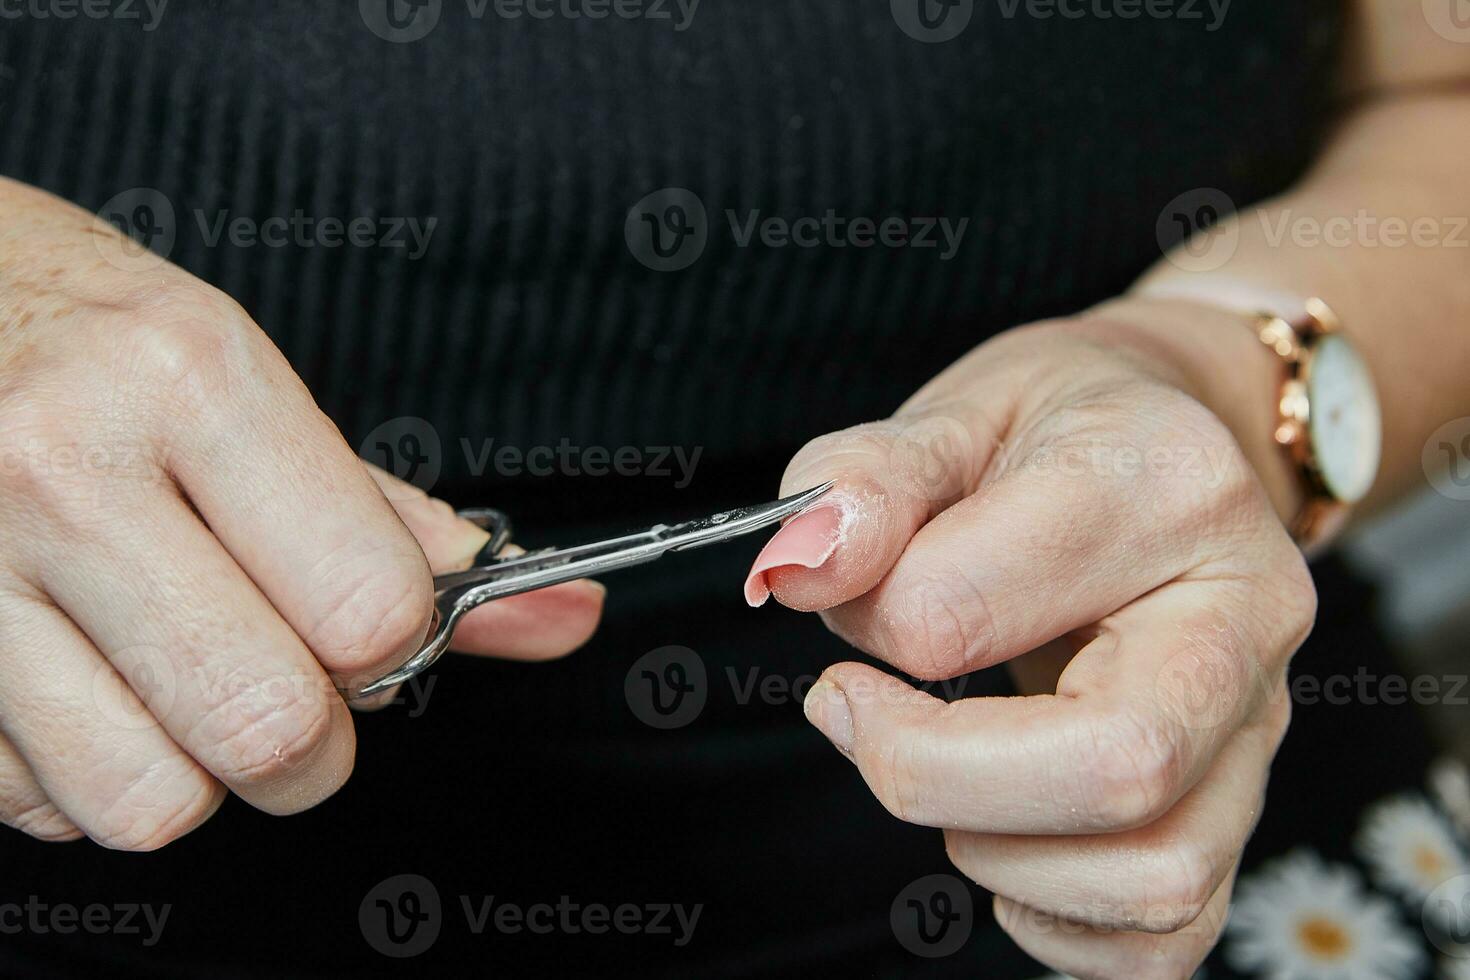 Professional Nail Technician Performing Gel Nail Extension and Manicure Using Machine photo